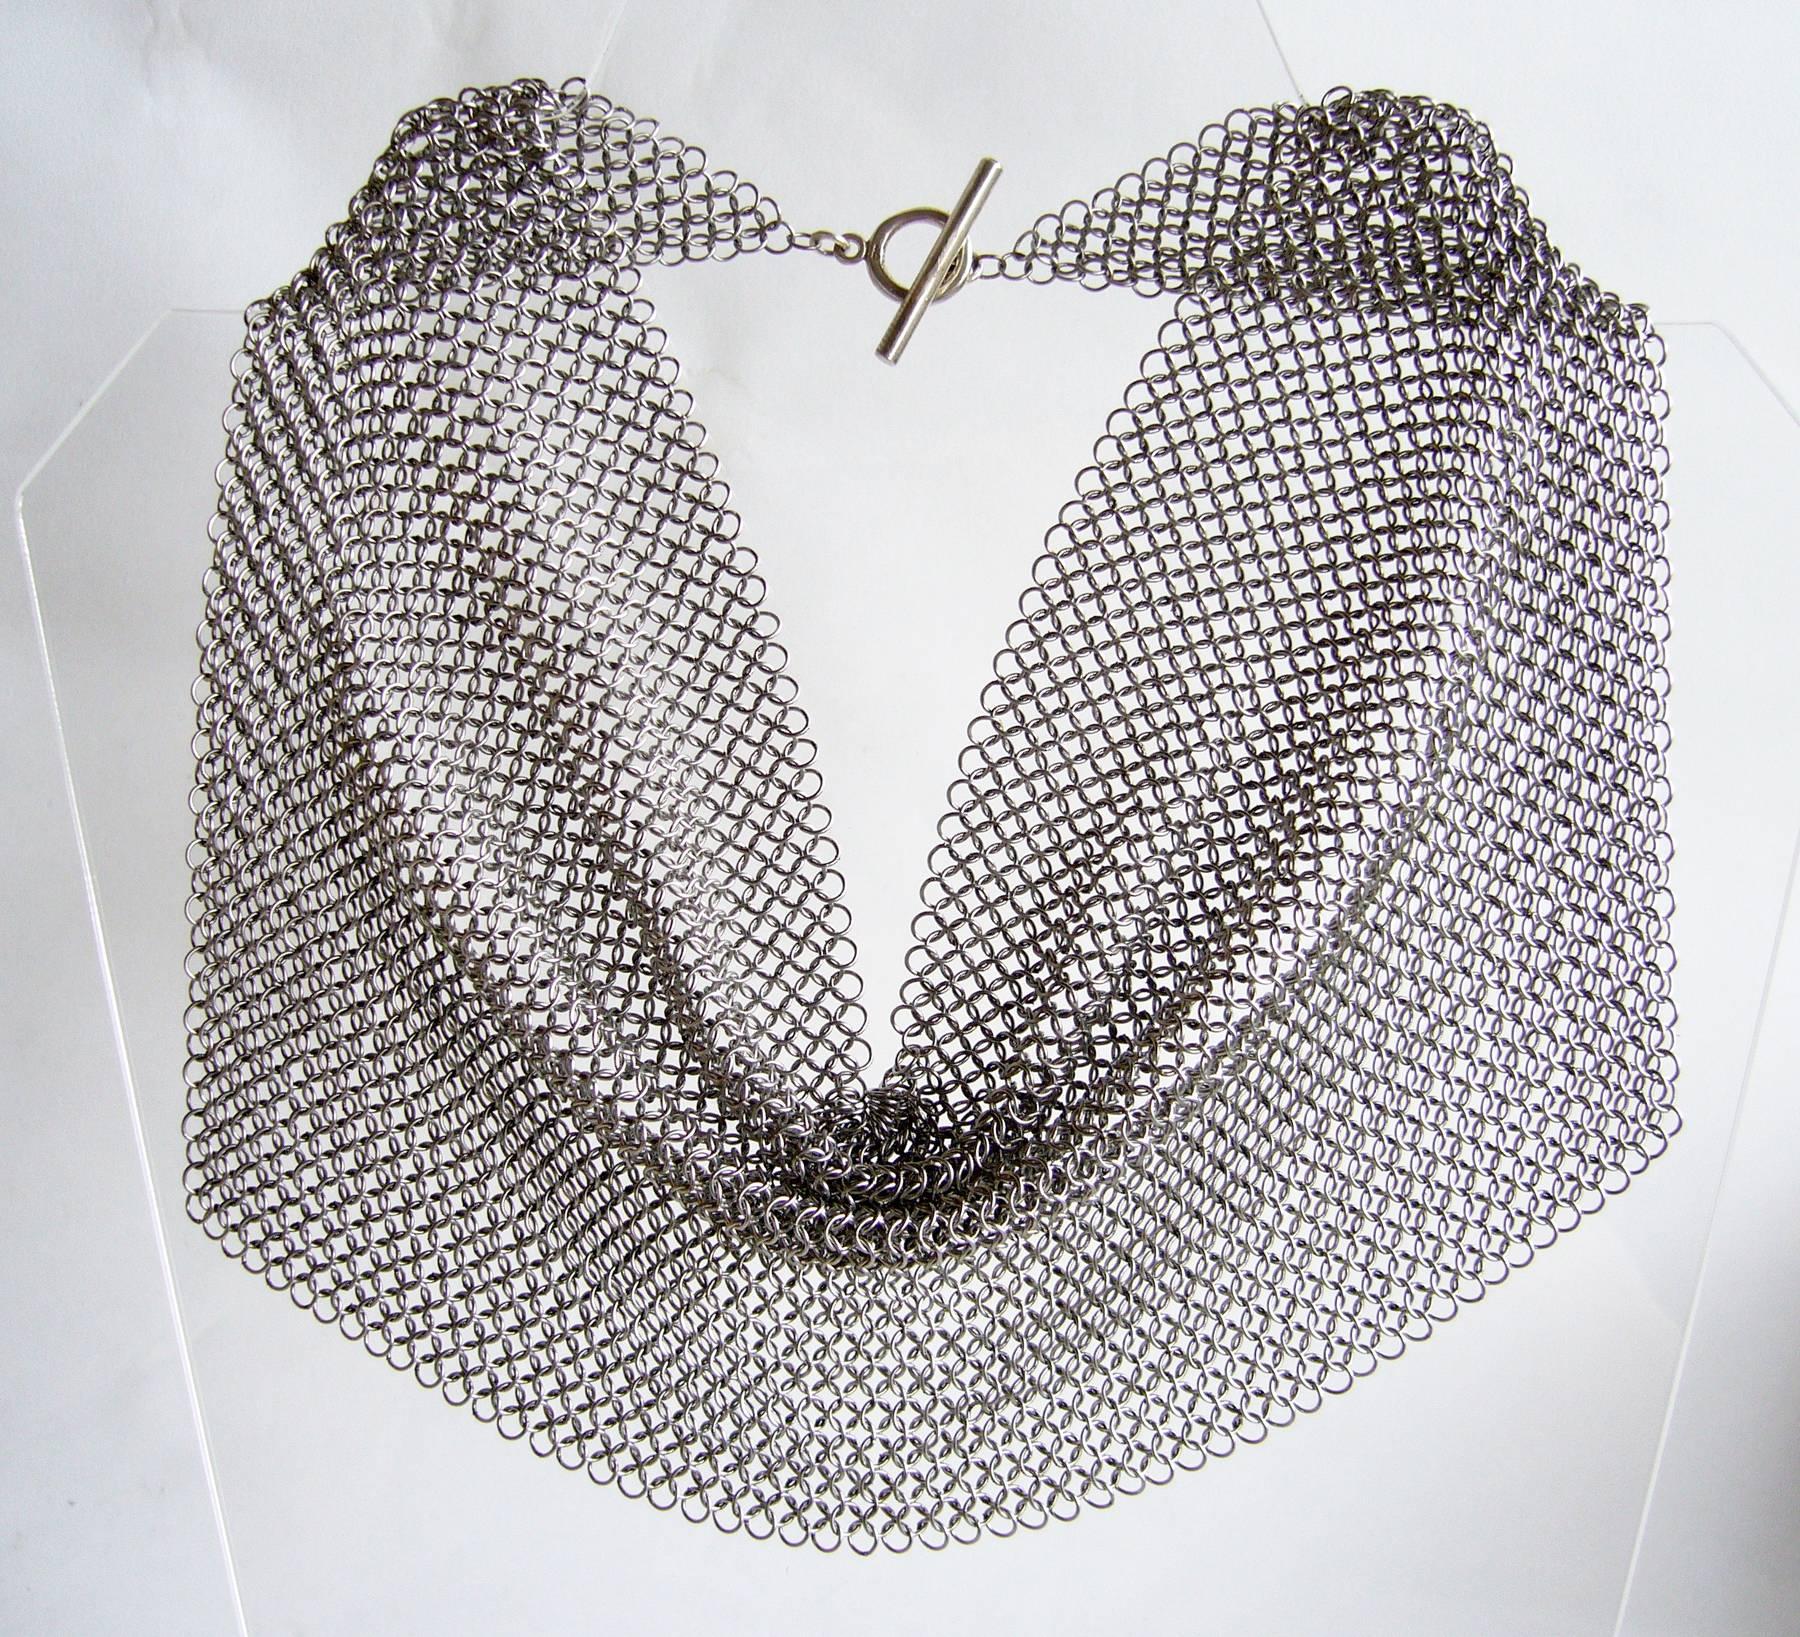 1990's stainless steel chain maille drape necklace created by Allison Stern of San Francisco, California.  Necklace has a wearable neck length of about 16"-16.5" and measures 17.5" by 4.75" when laid flat.  Unsigned. In excellent